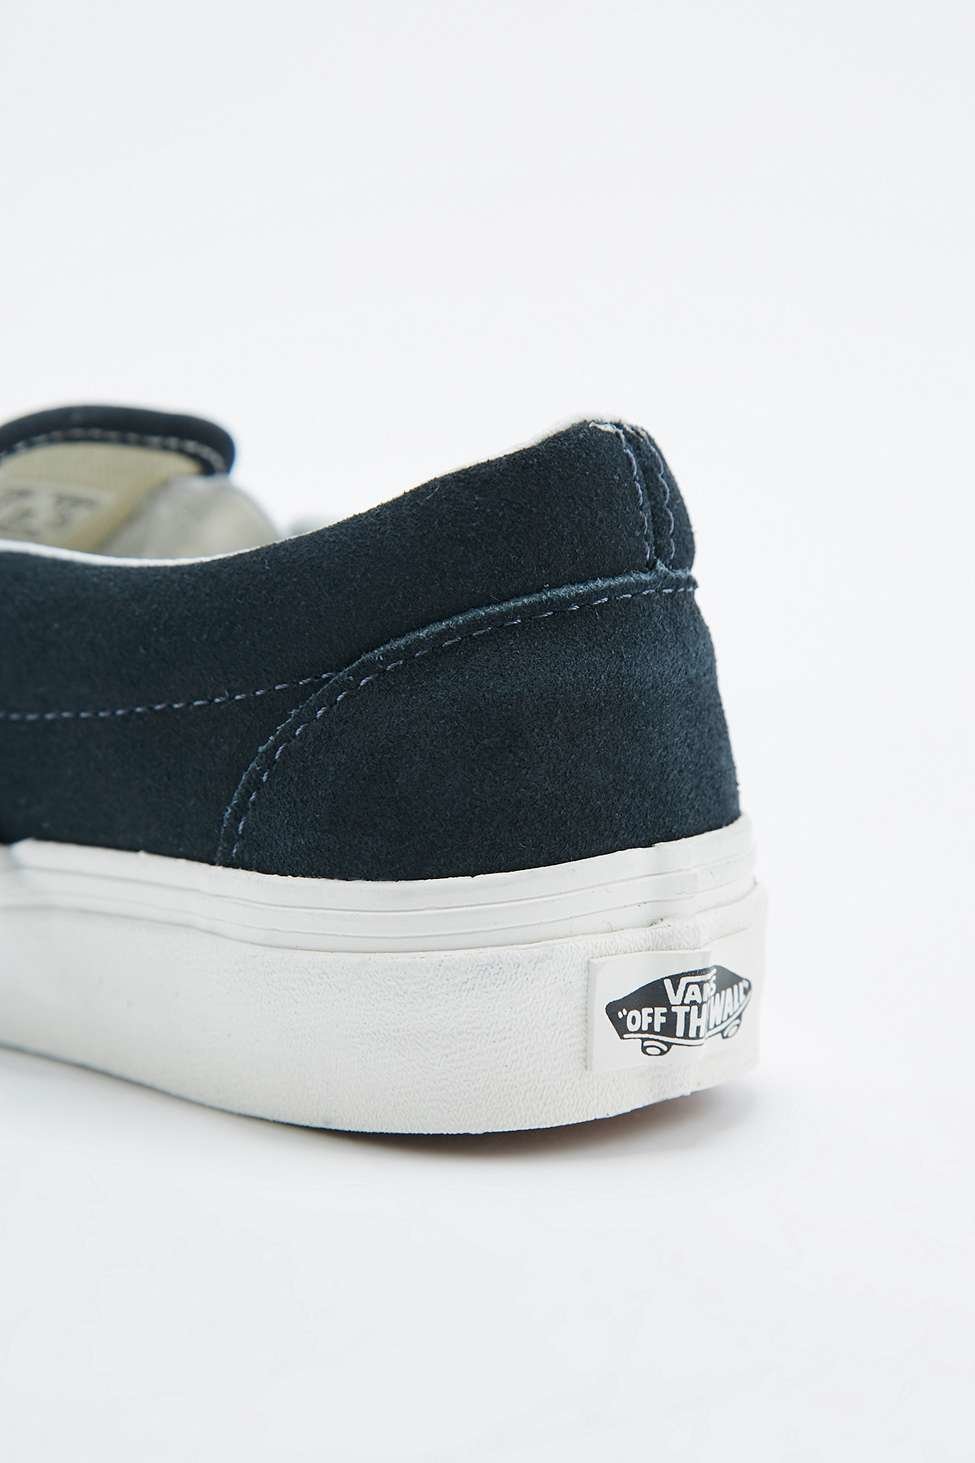 Vans Slip-on Classic Navy Suede Trainers in Blue - Lyst